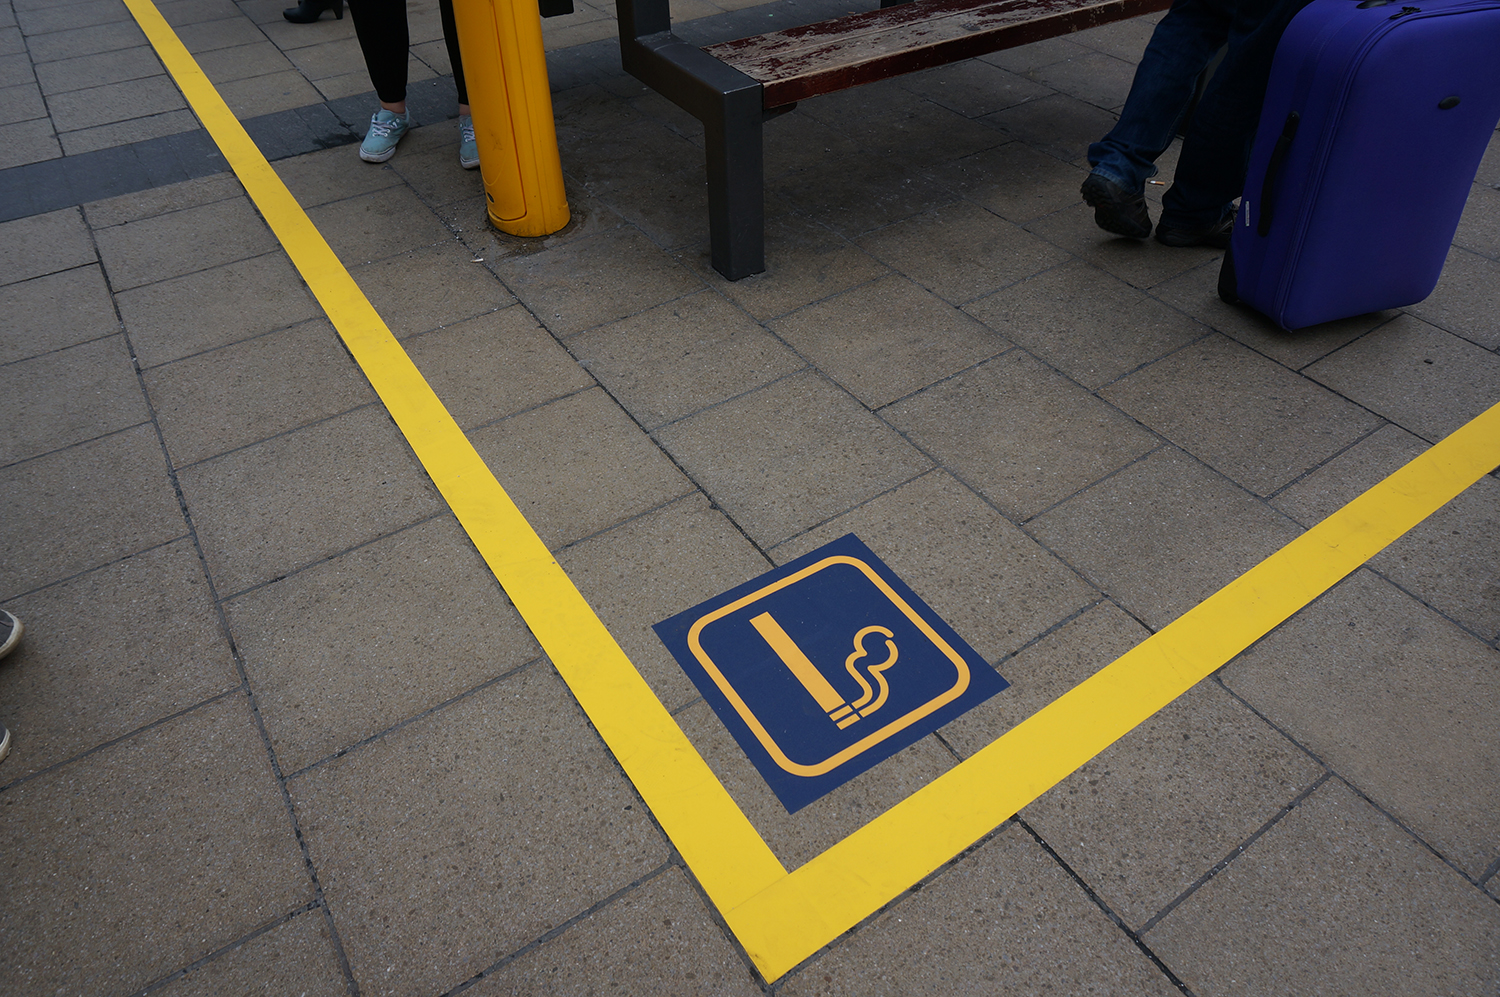 An image of a smoking zone defined by yellow tape and marked with an image of a cigarette 